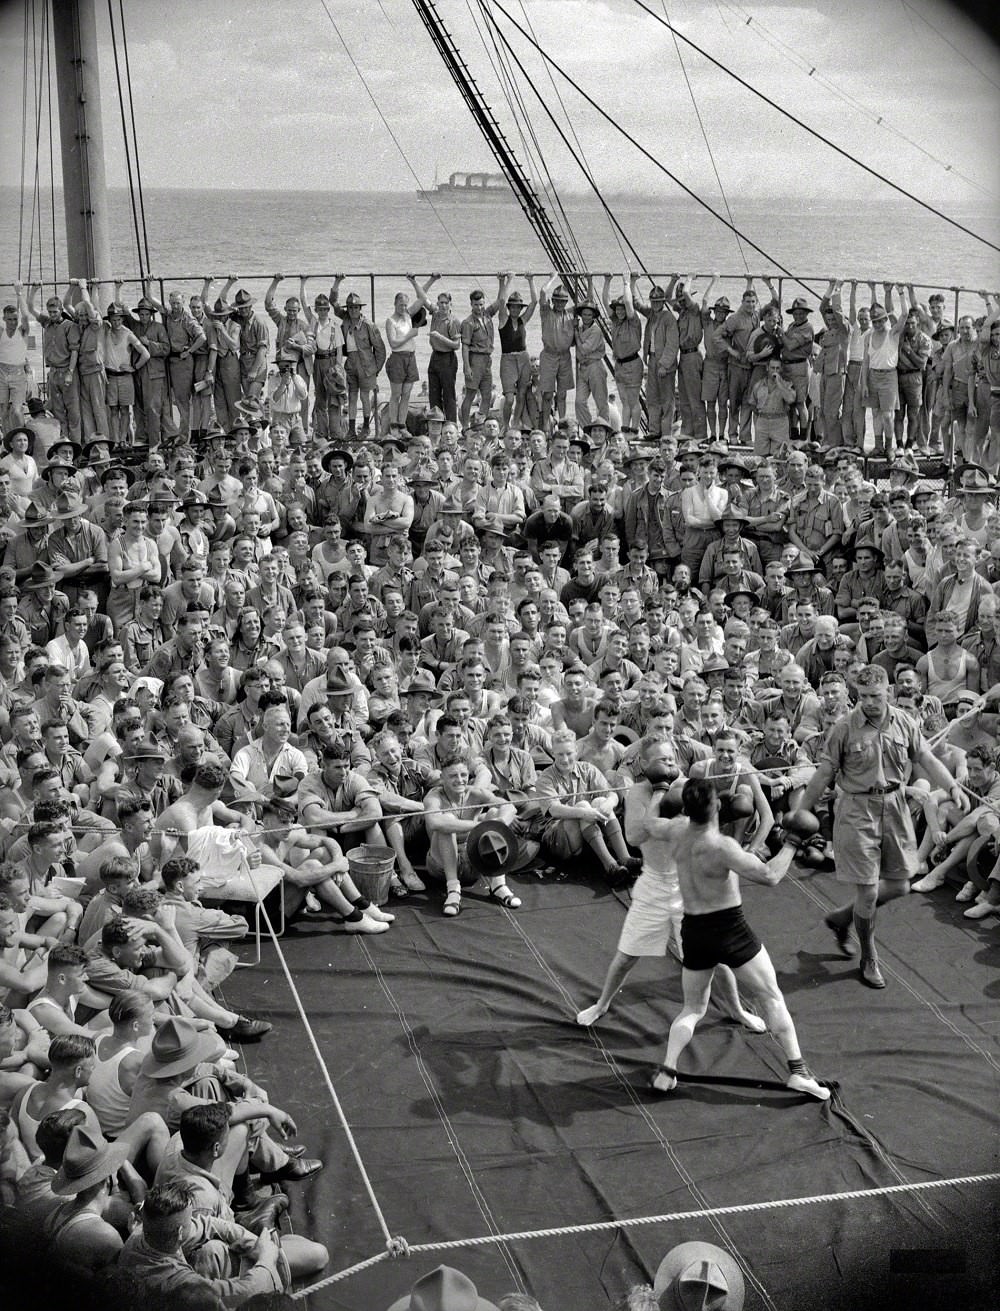 Boxing match in progress on the deck of New Zealand troopship Dominion Monarch, 1940